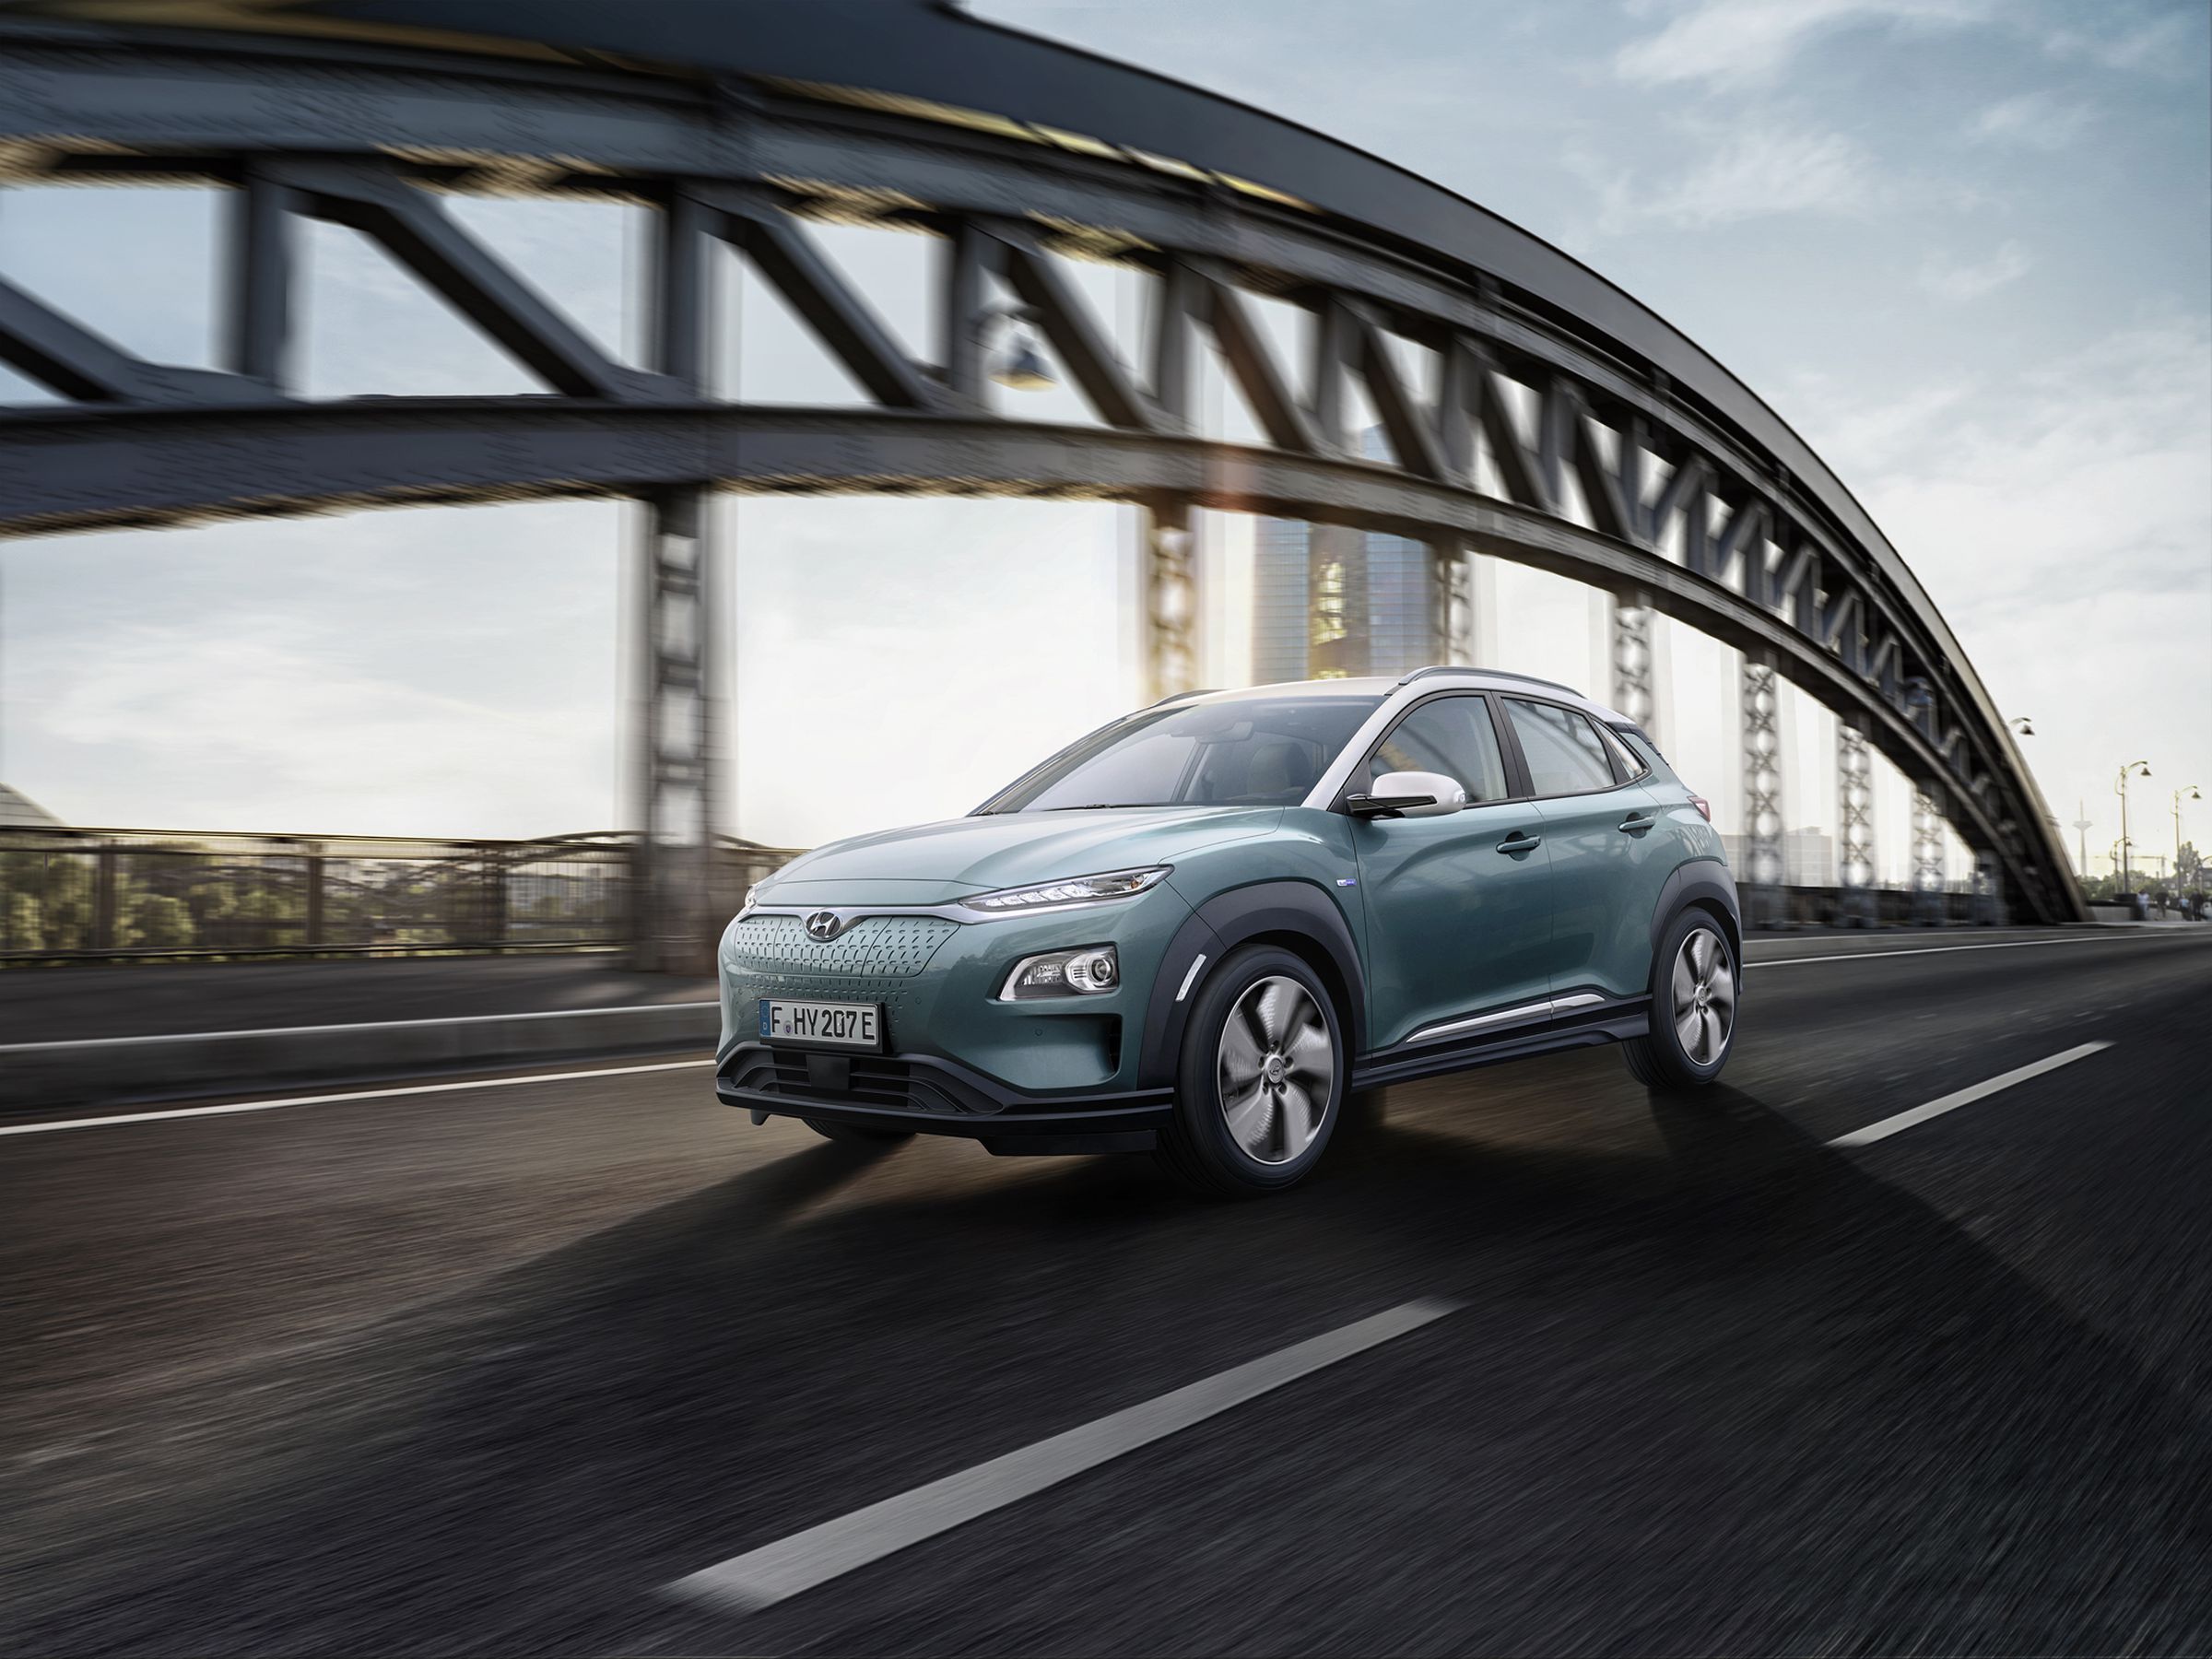 Hyundai’s Kona could be one option on the lower-end when it comes to the US in the next half-year.